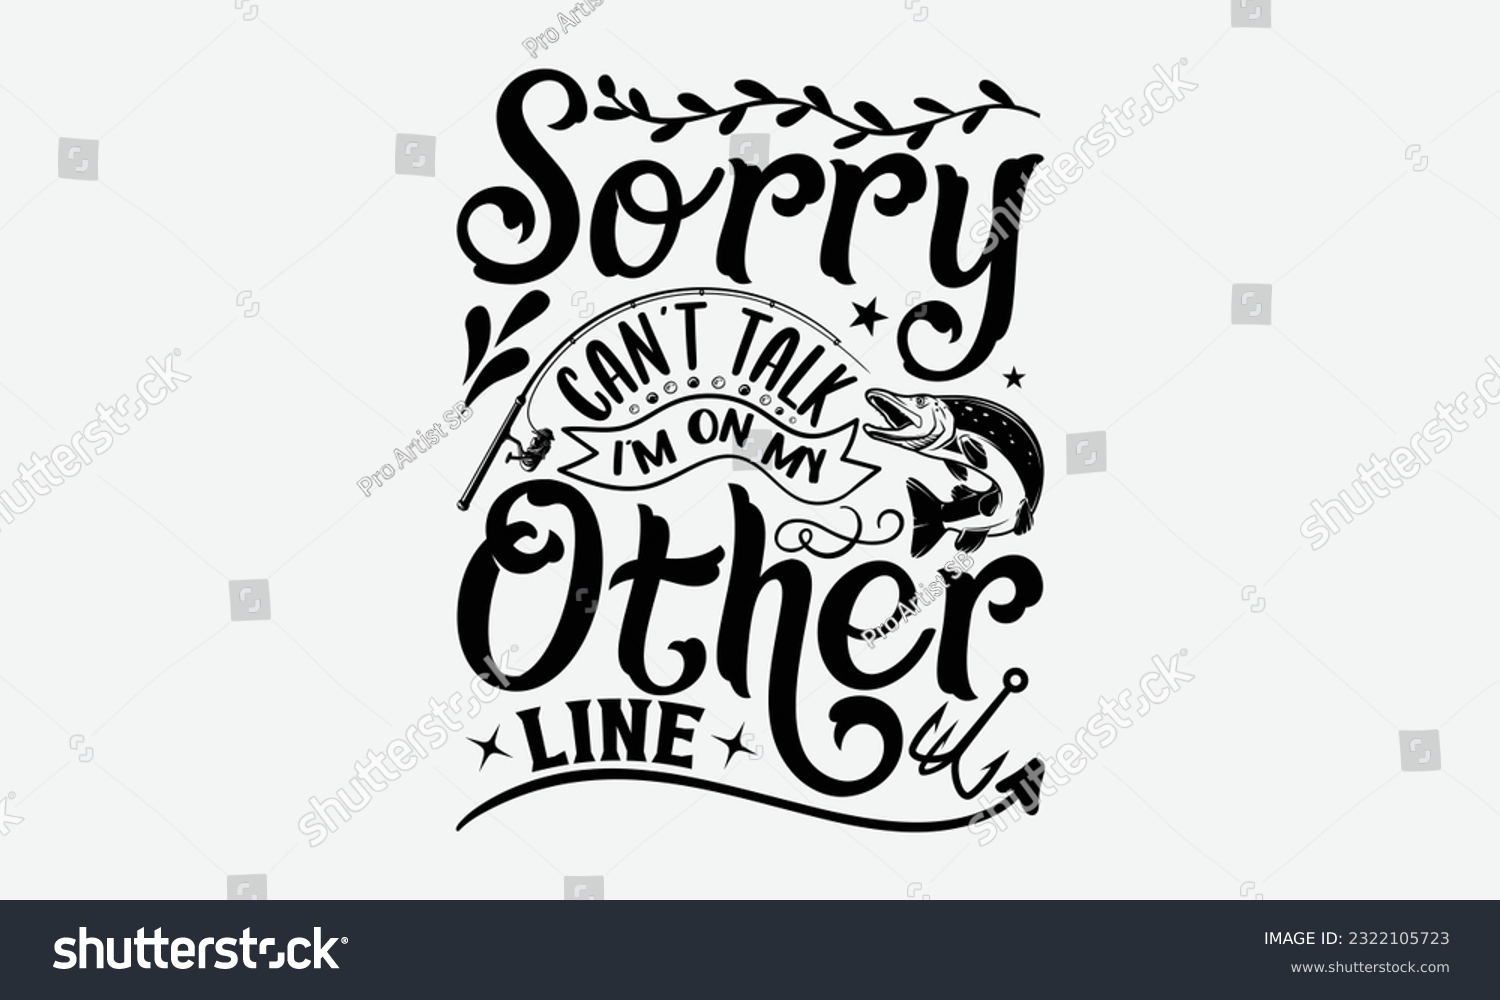 SVG of Sorry Can’t Talk I’m On My Other Line - Fishing SVG Design, Fisherman Quotes, Hand Written Vector T-shirt Design, For Prints on Mugs and Bags, Posters. svg